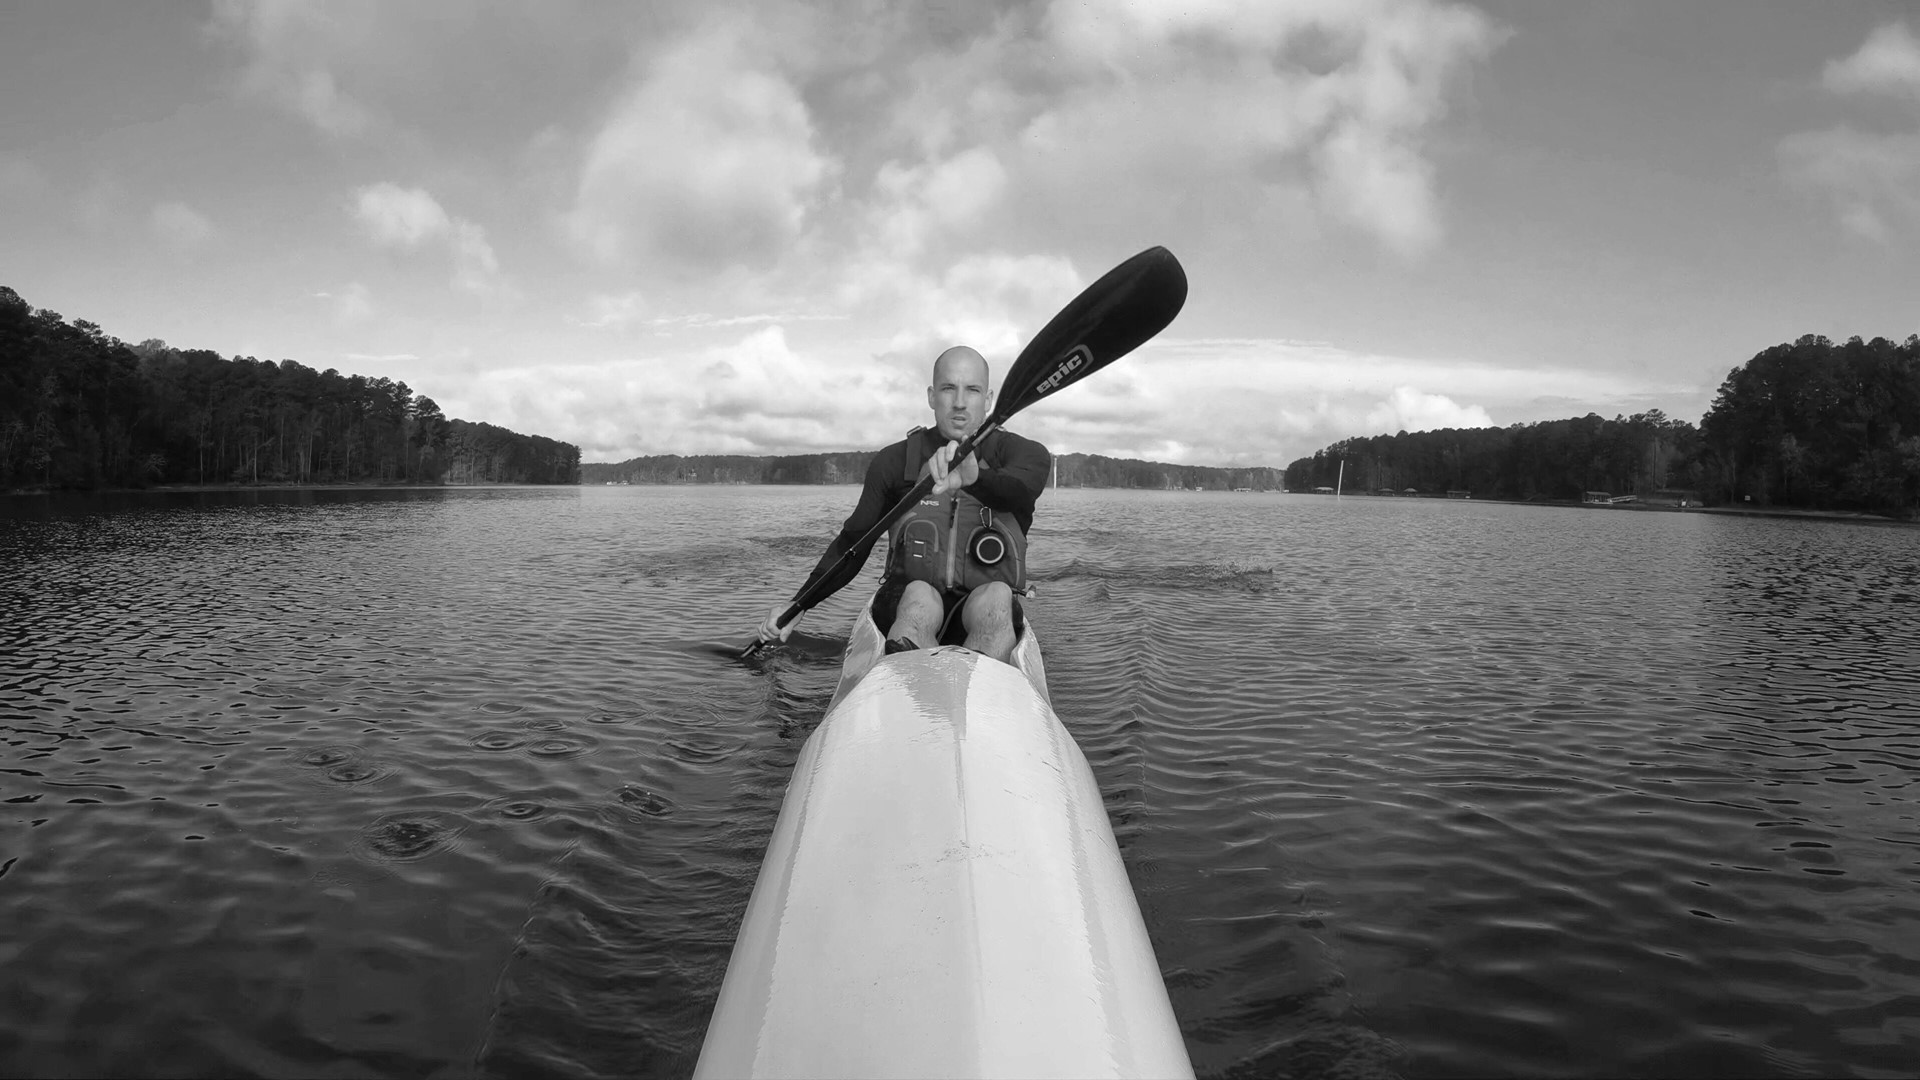 Joshua Forester has made history as the first person to continuously kayak the entire circumference of Lake Lanier, and he did it in less than a week.